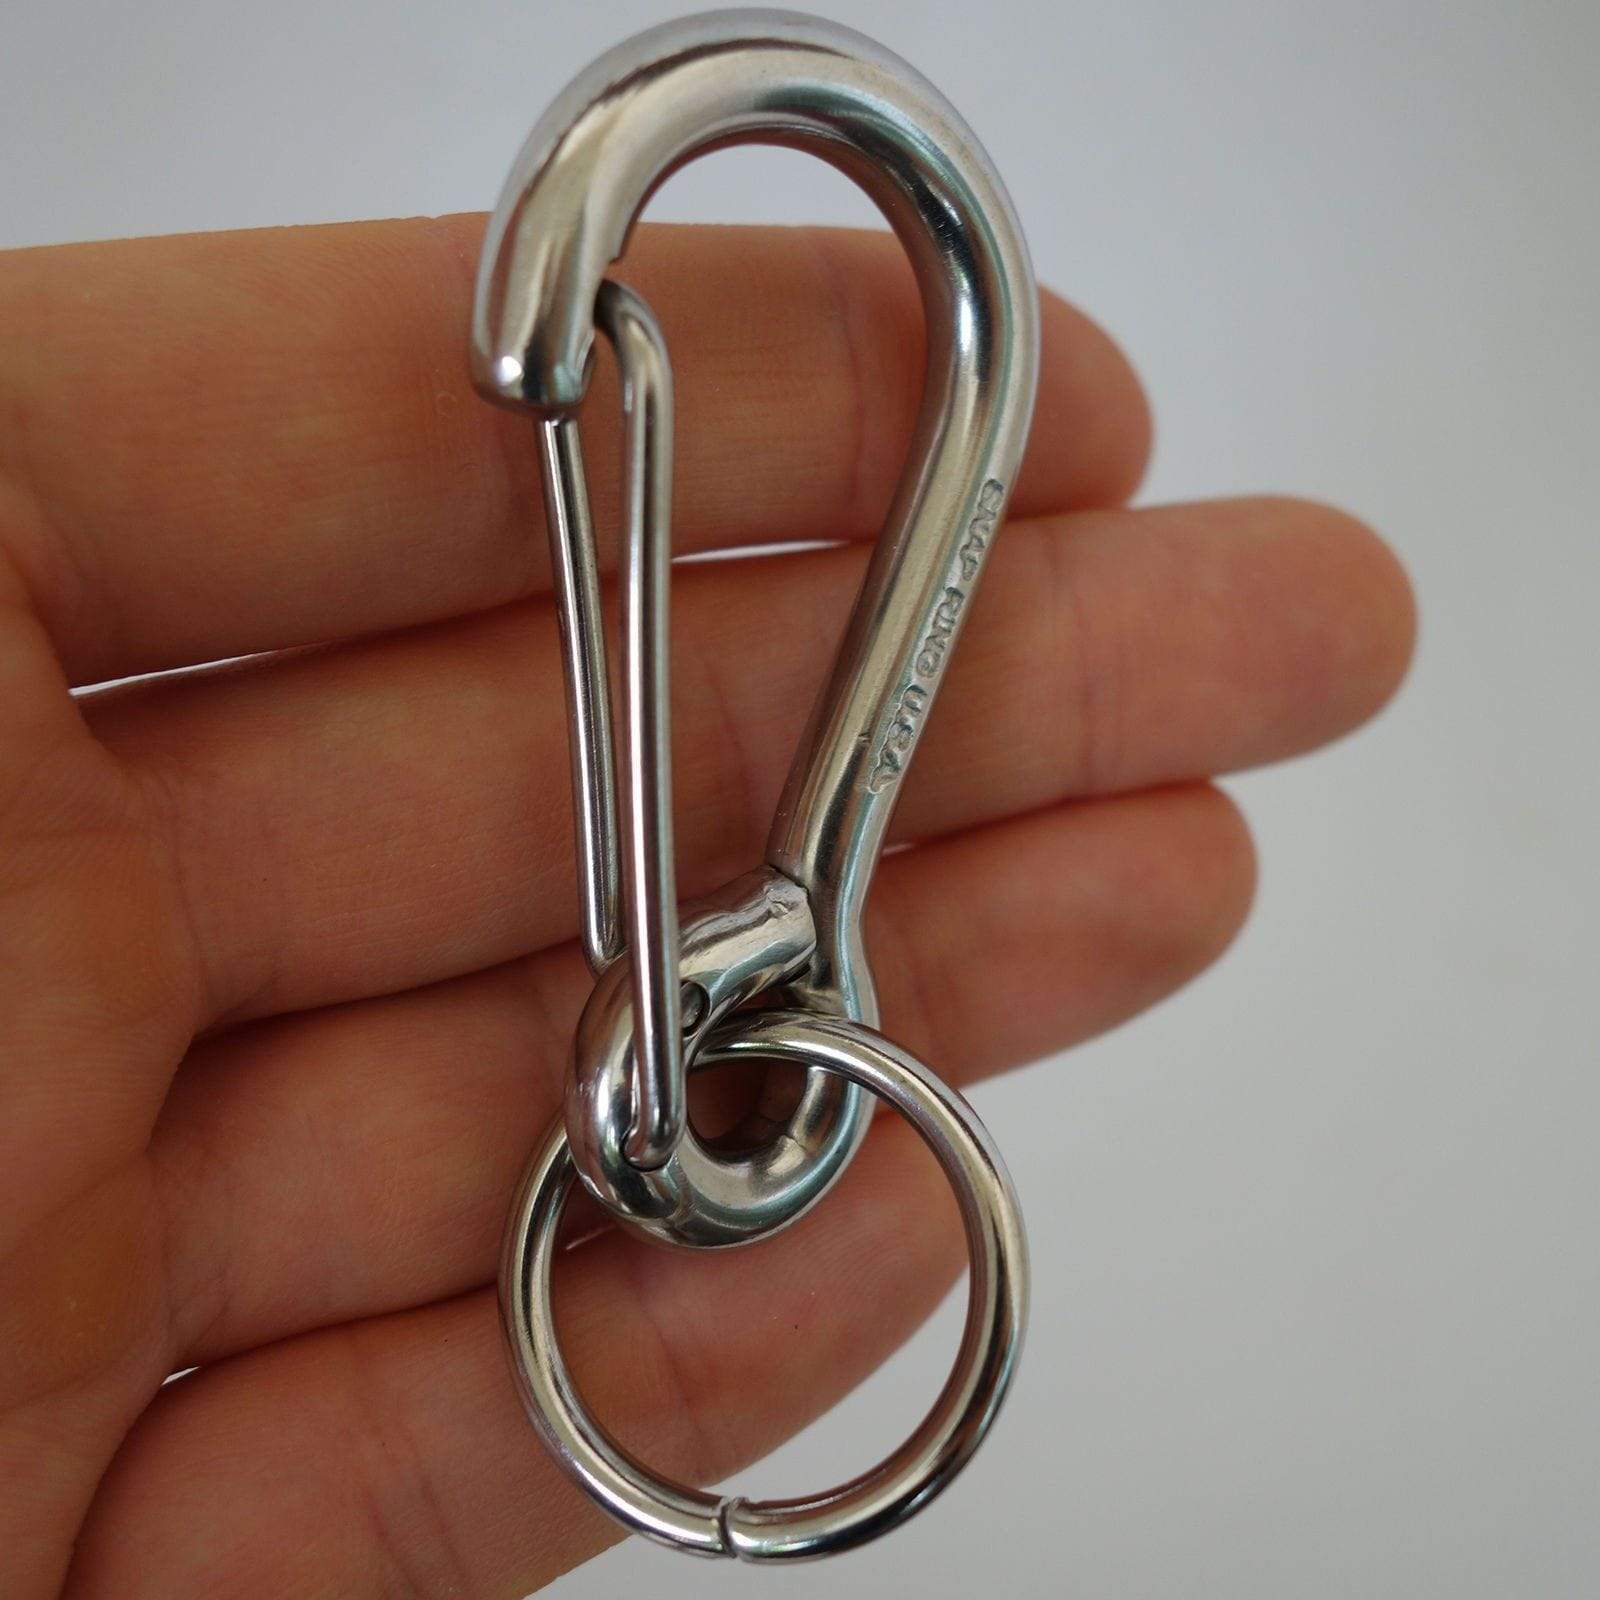 Strong Metal Carabiner Keychain Key Ring Chain Dog Collar Lead Belt Snap Clip Strong Metal Carabiner Keychain Key Ring Chain Dog Collar Lead Belt Snap Clip